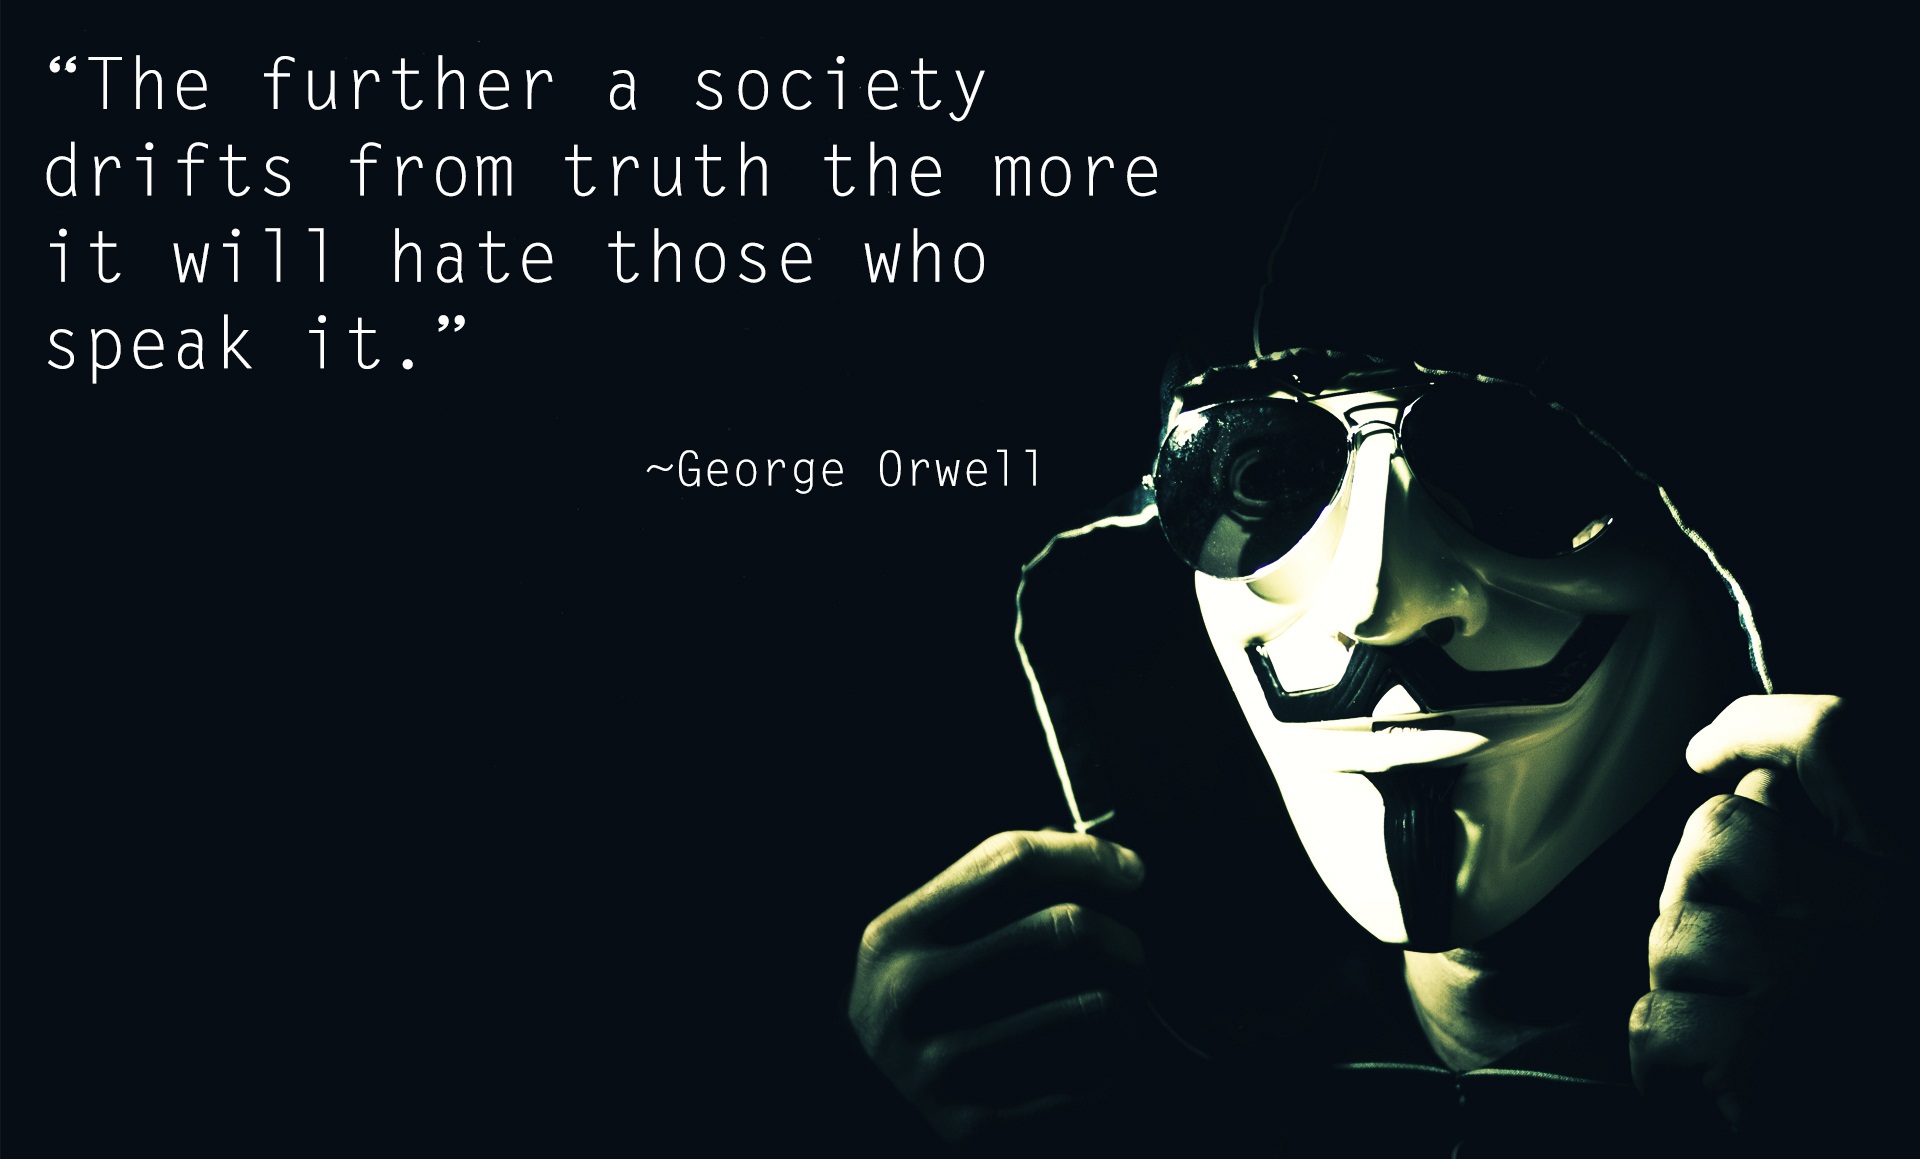 The further a society drifts from truth the more it will hate those who speak it. George Orwell